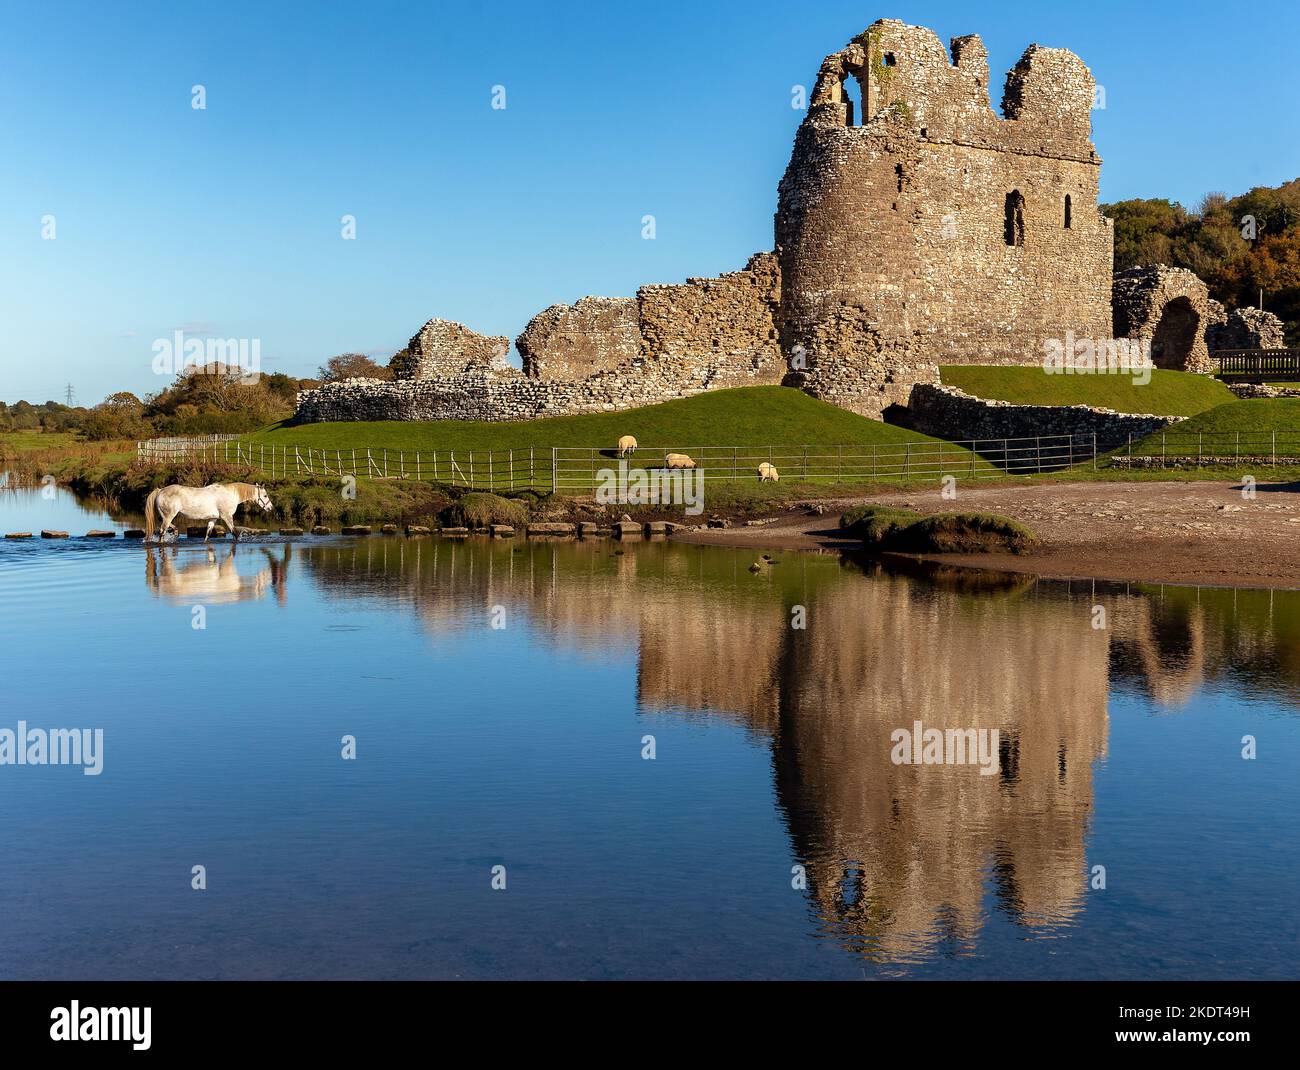 Horses crossing a river next to the ruins of an ancient castle. (Ogmore Castle, Glamorgan, Wales) Stock Photo